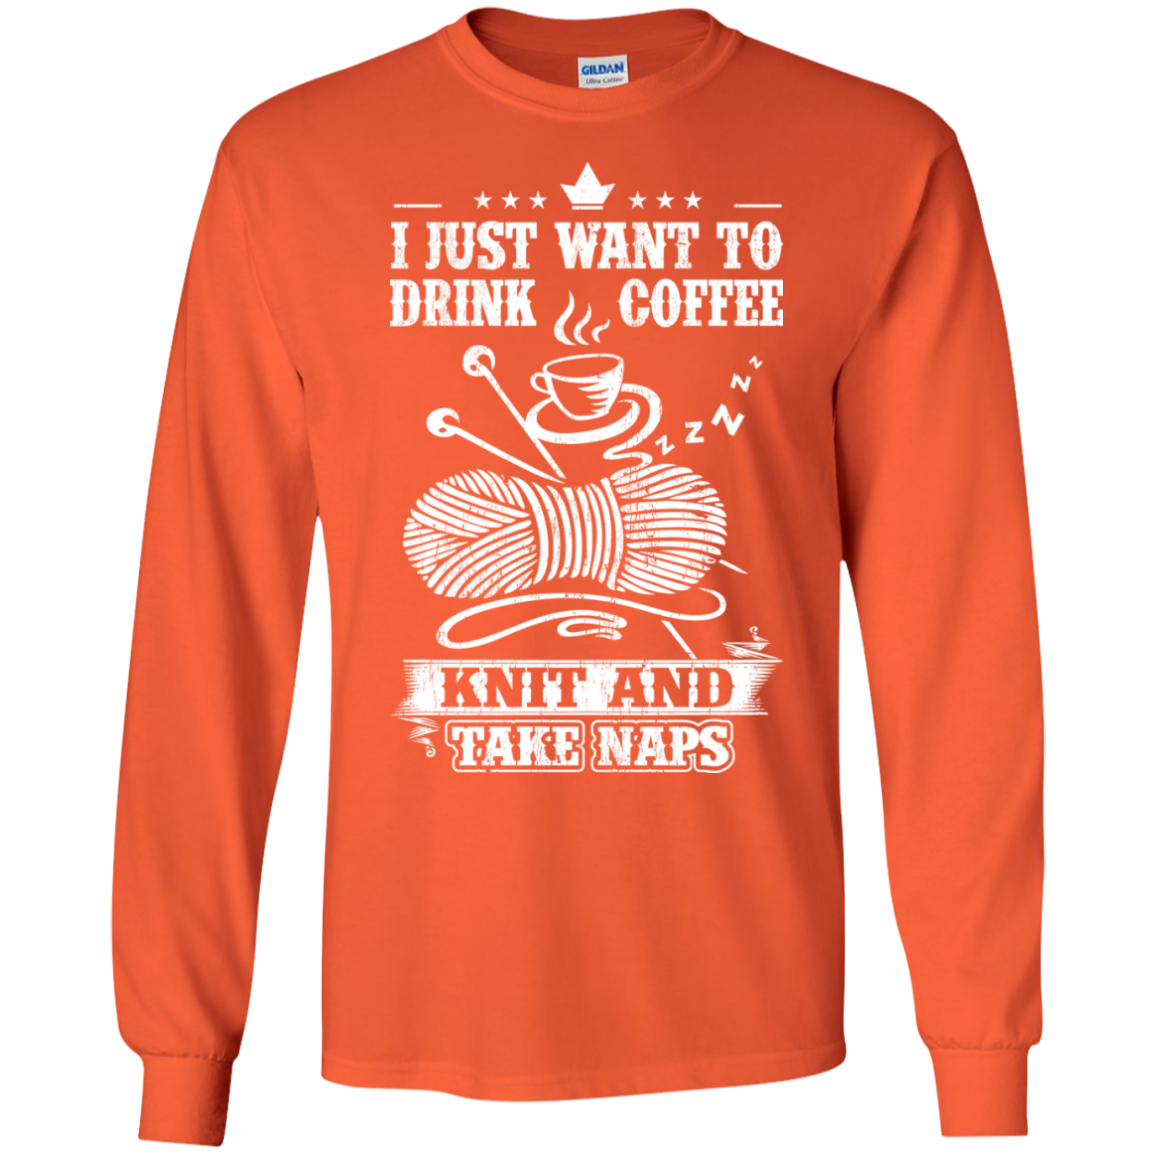 Coffee-Knit-Nap Long Sleeve Ultra Cotton T-Shirt - Crafter4Life - 4